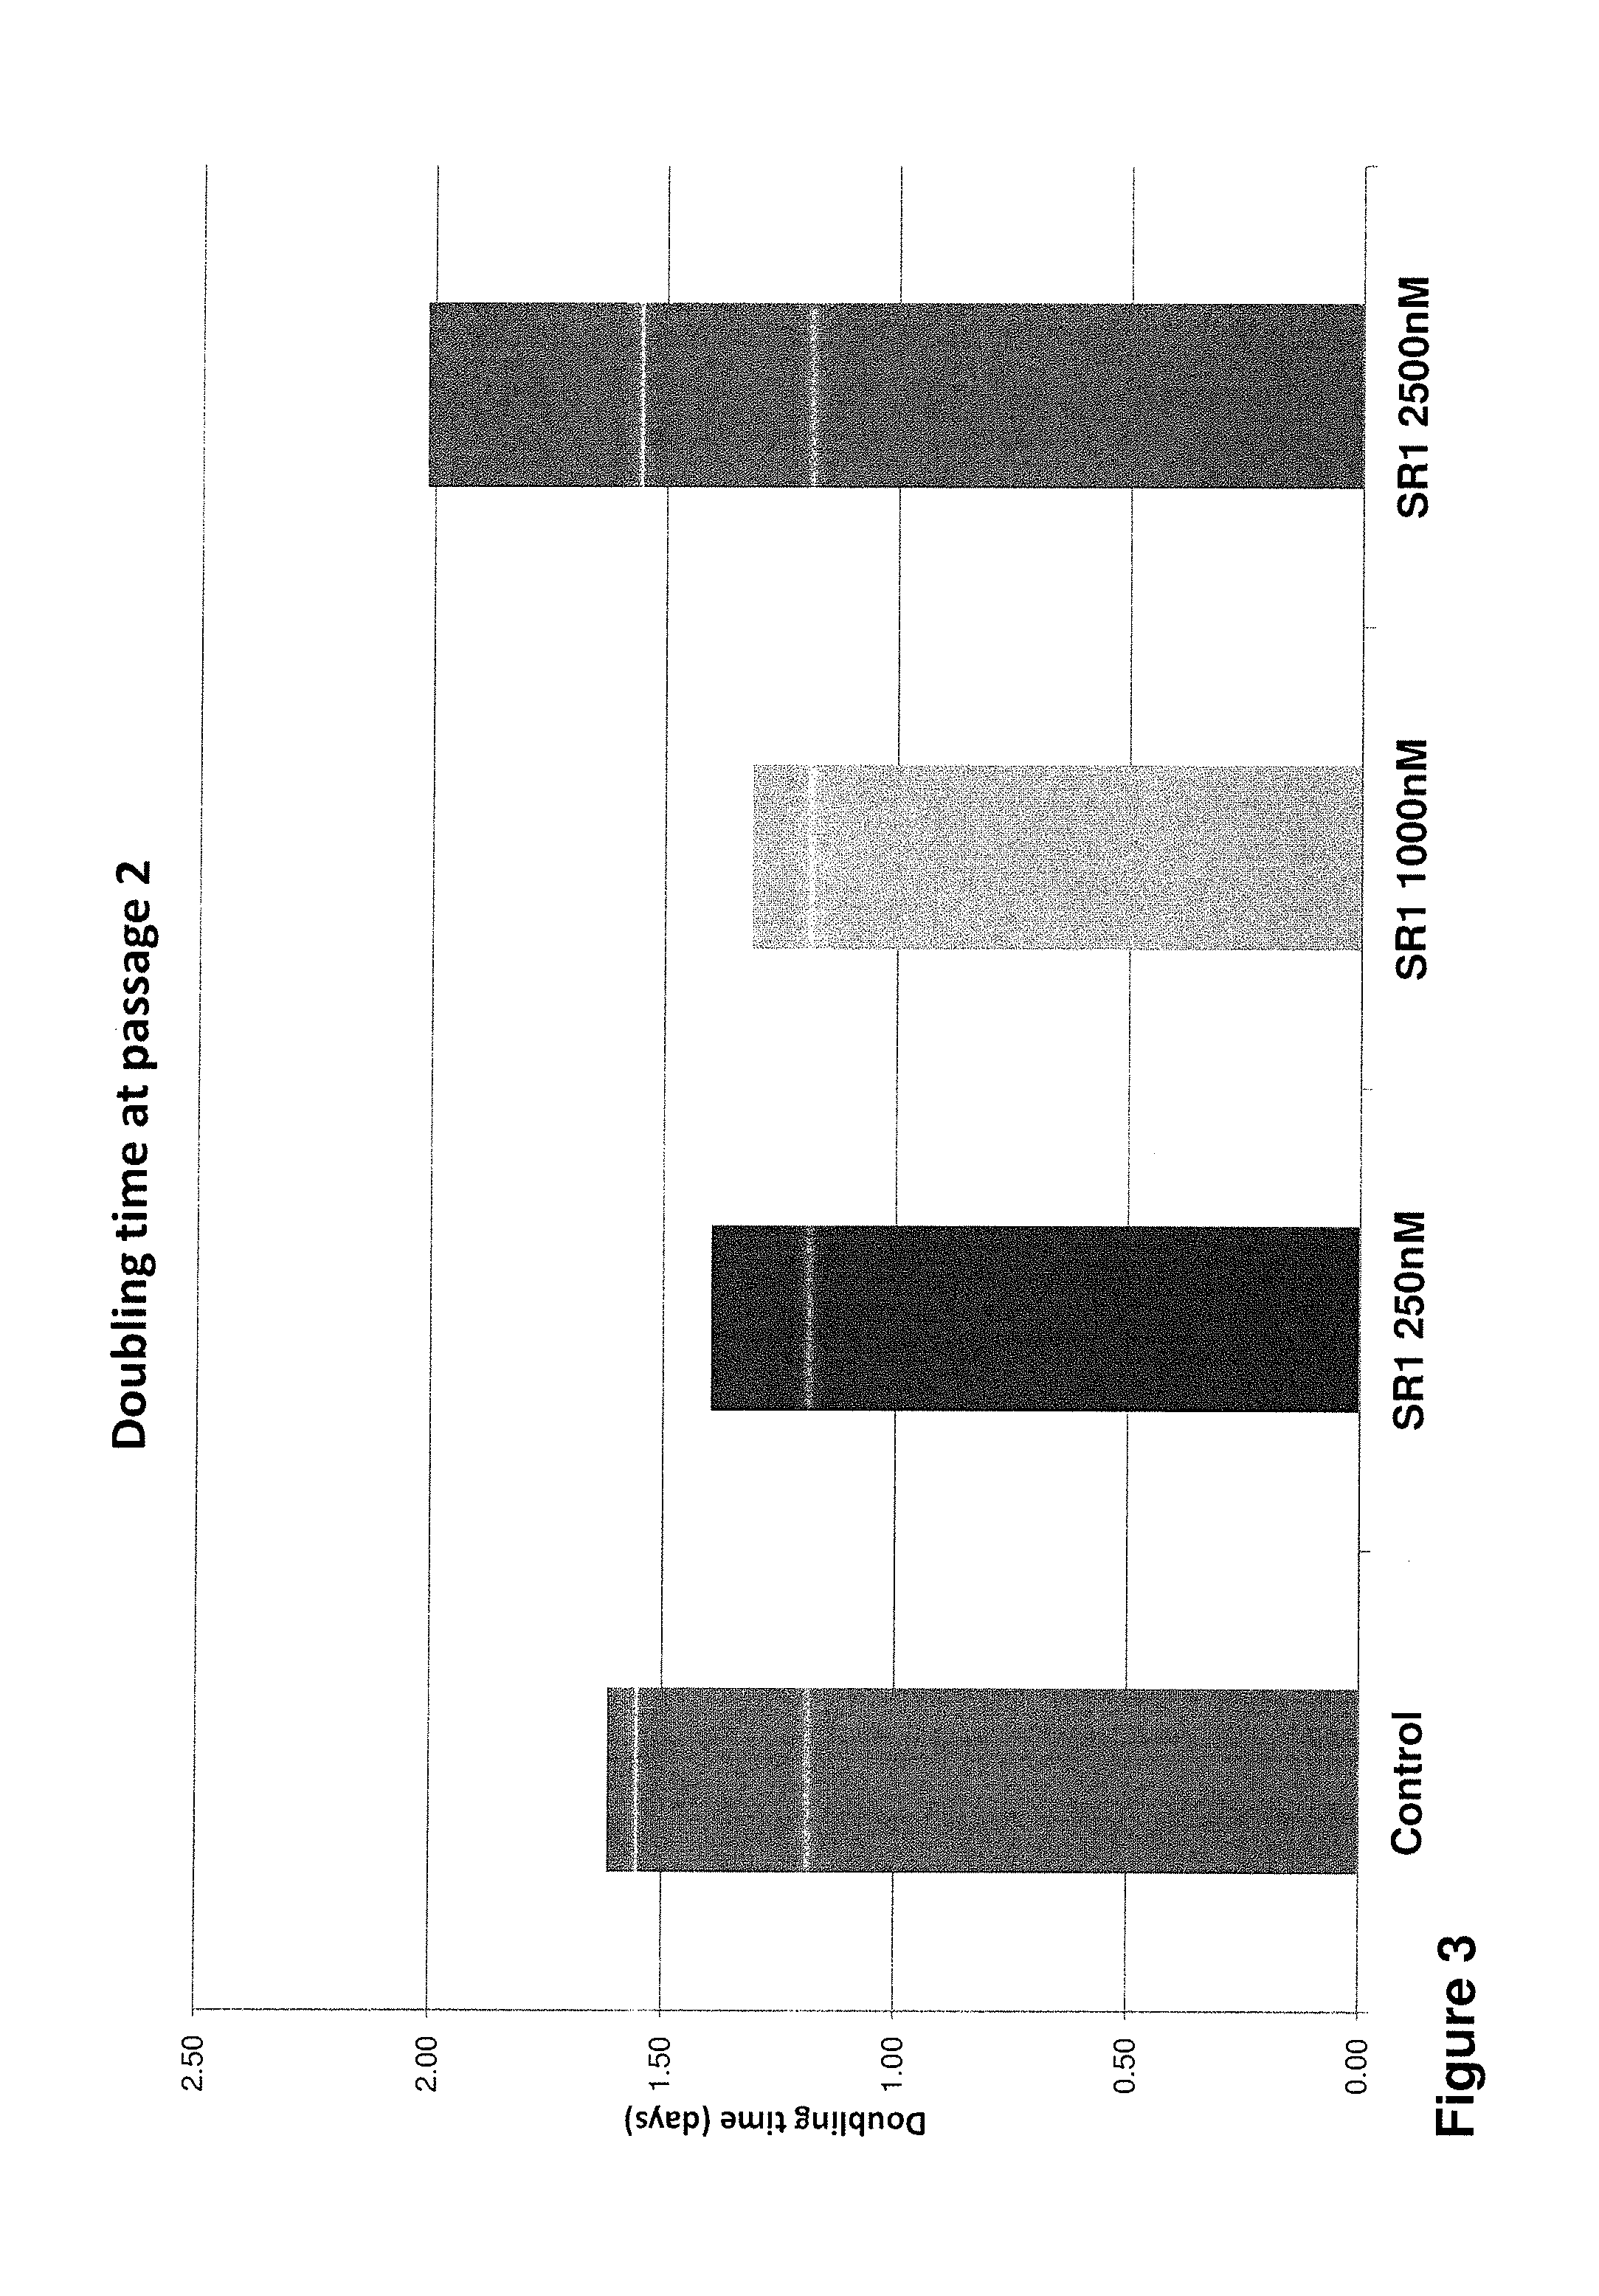 Methods of culturing and expanding mesenchymal stem cells